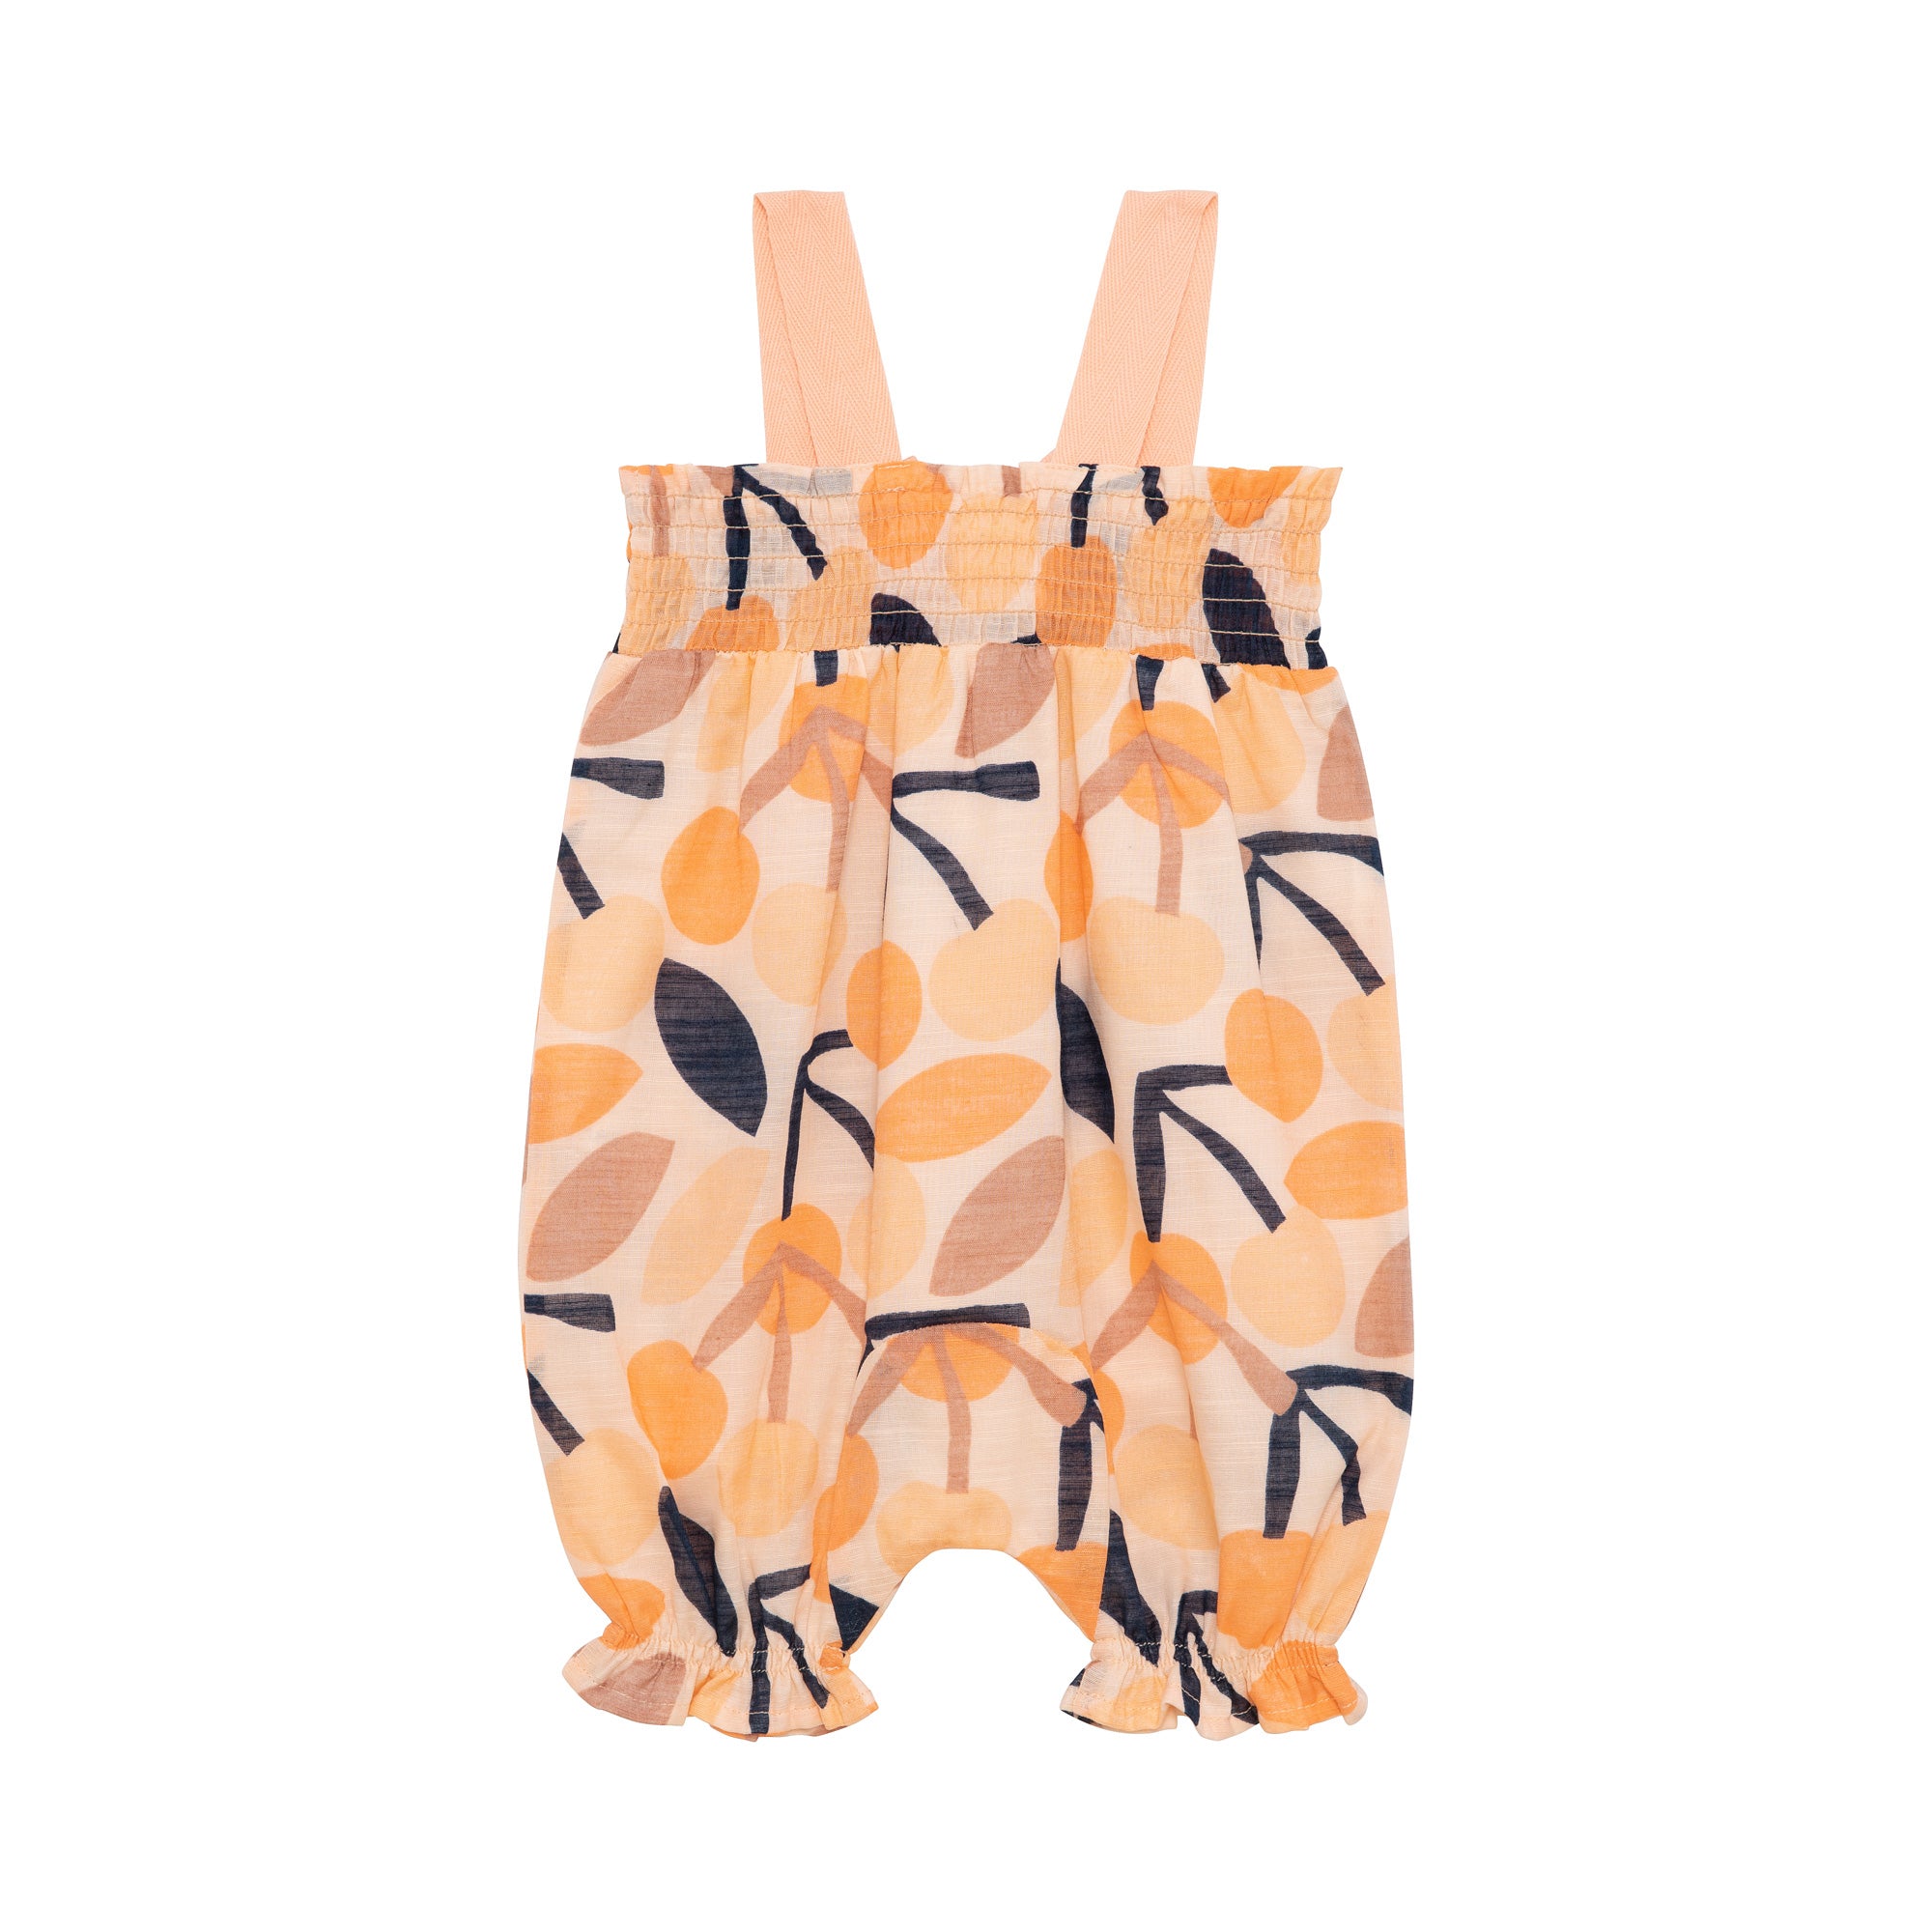 Printed Cotton Romper With Bow